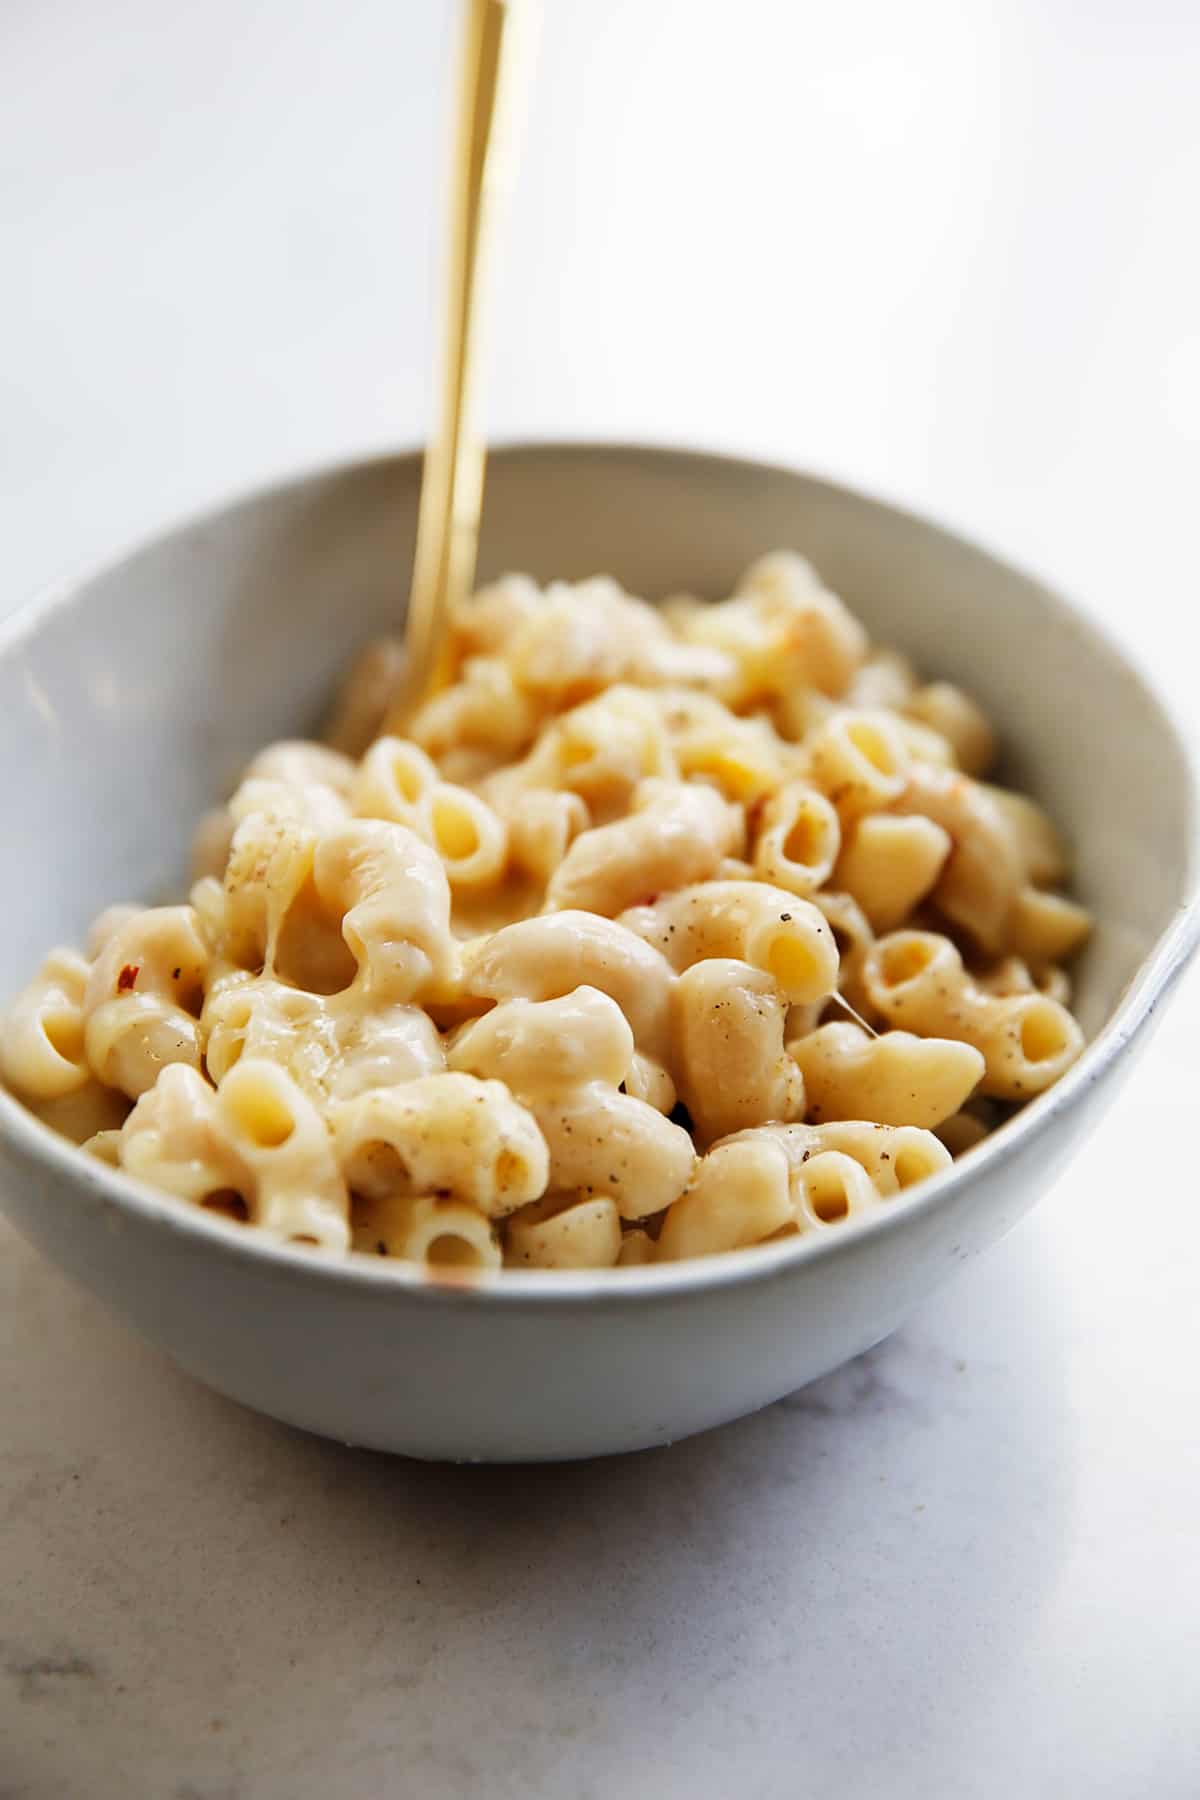 Creamy Mac and cheese in a bowl.